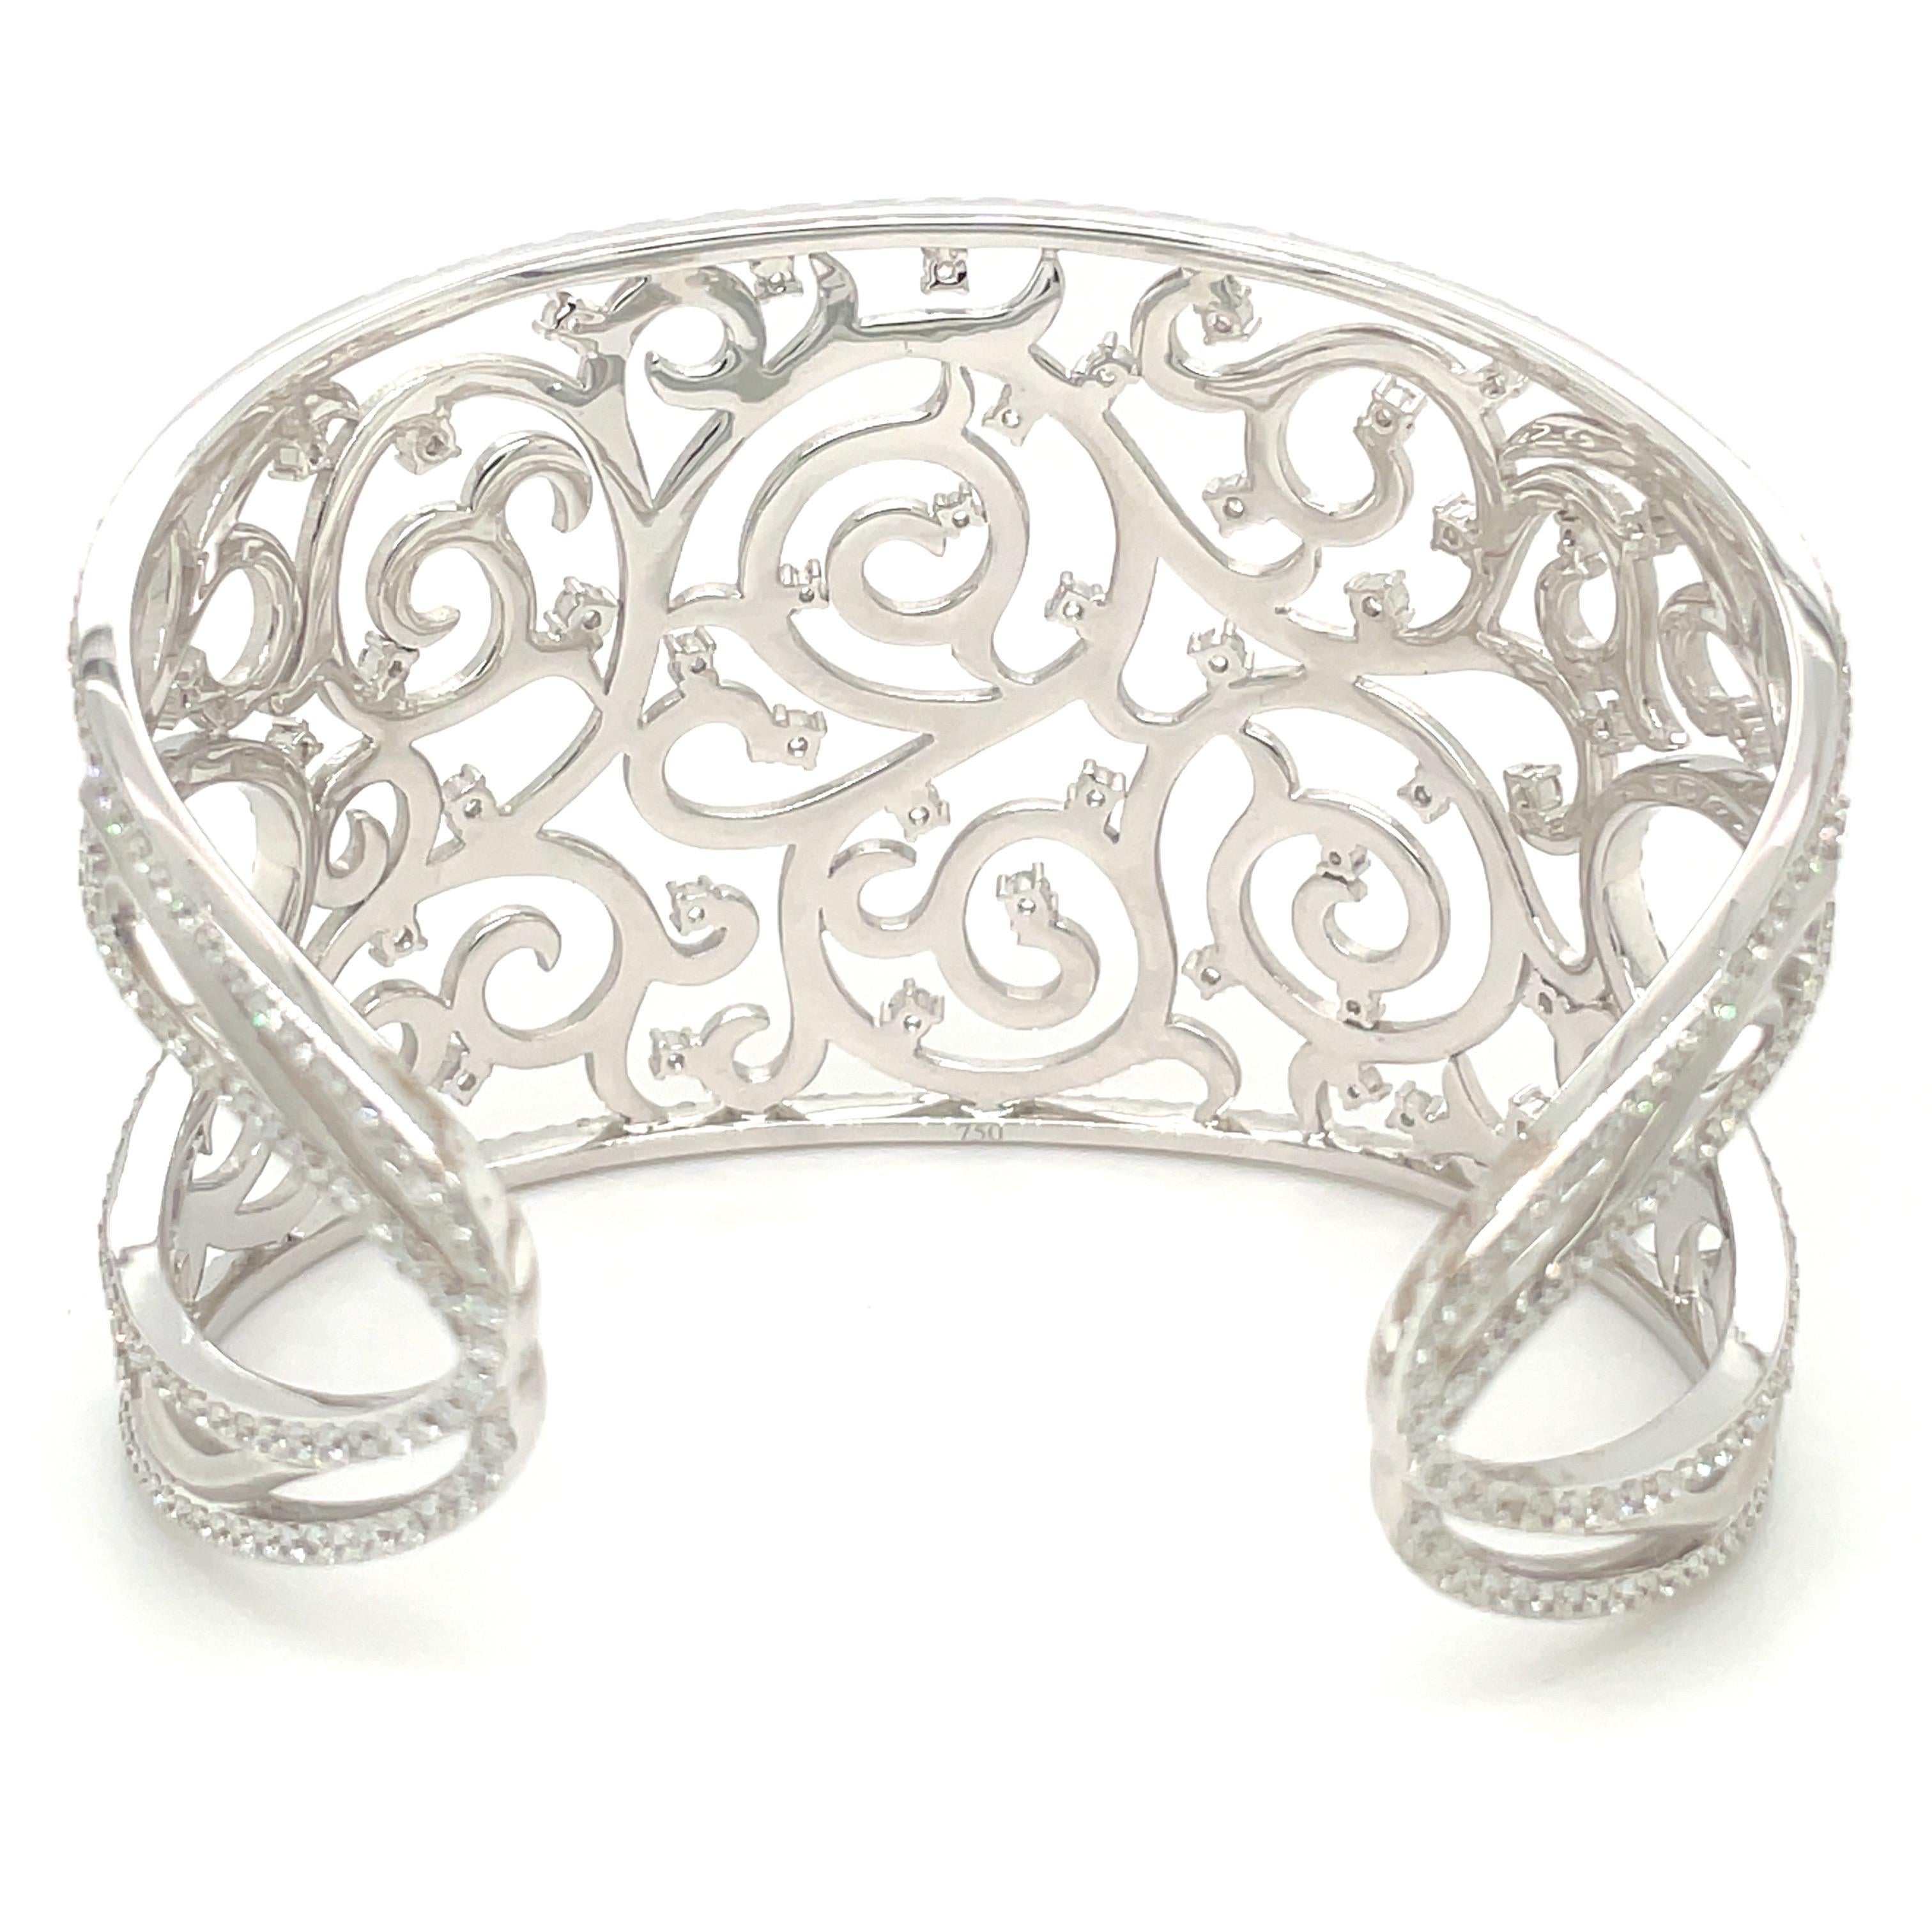 Cellini 18kt White Gold and Diamond 4.90Ct. Lace Cuff Bracelet For Sale 9